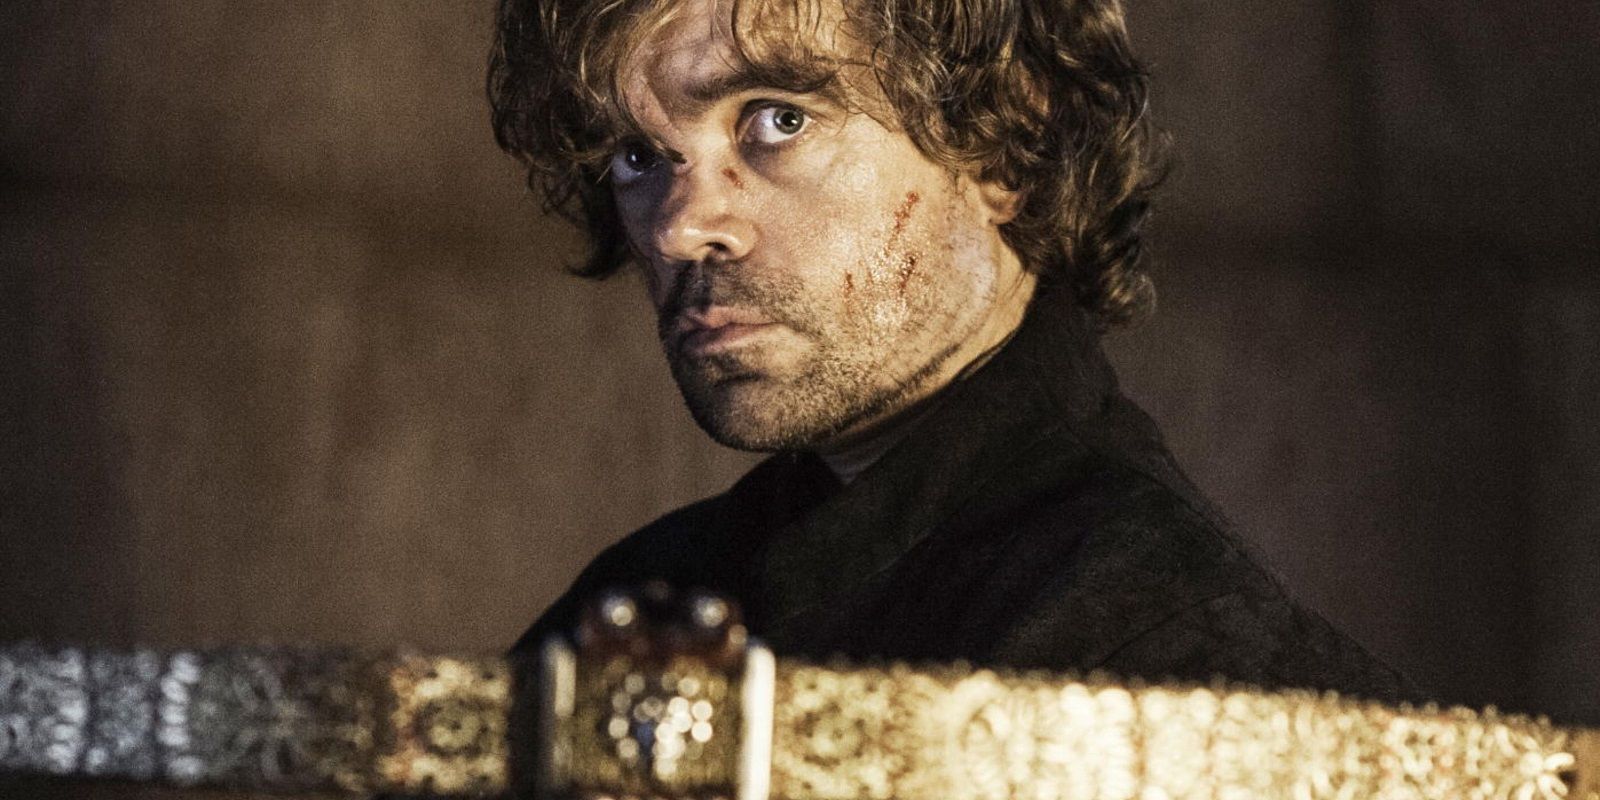 The Imp Tyrion Lannister played by Peter Dinklage killing his father Tywin with a crossbow on Game of Thrones